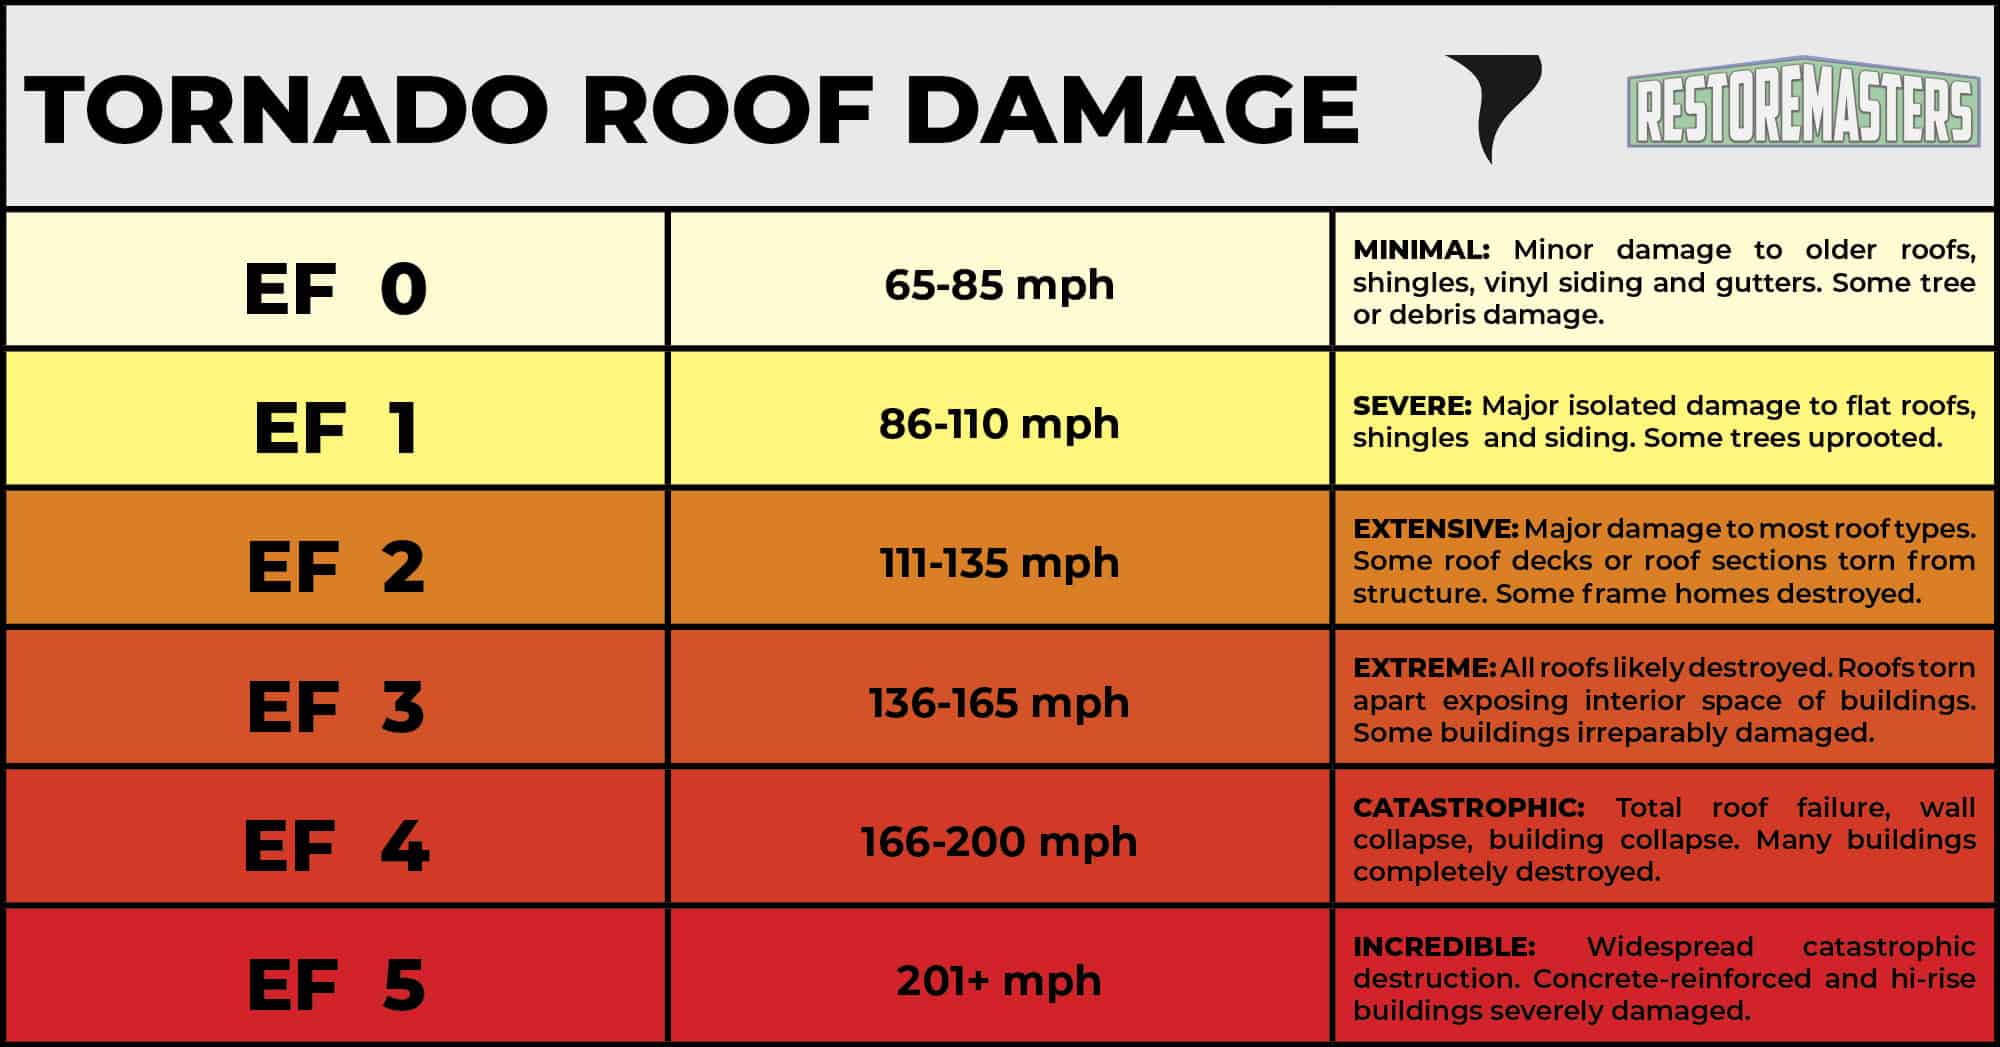 Roof Damage by Tornado Category